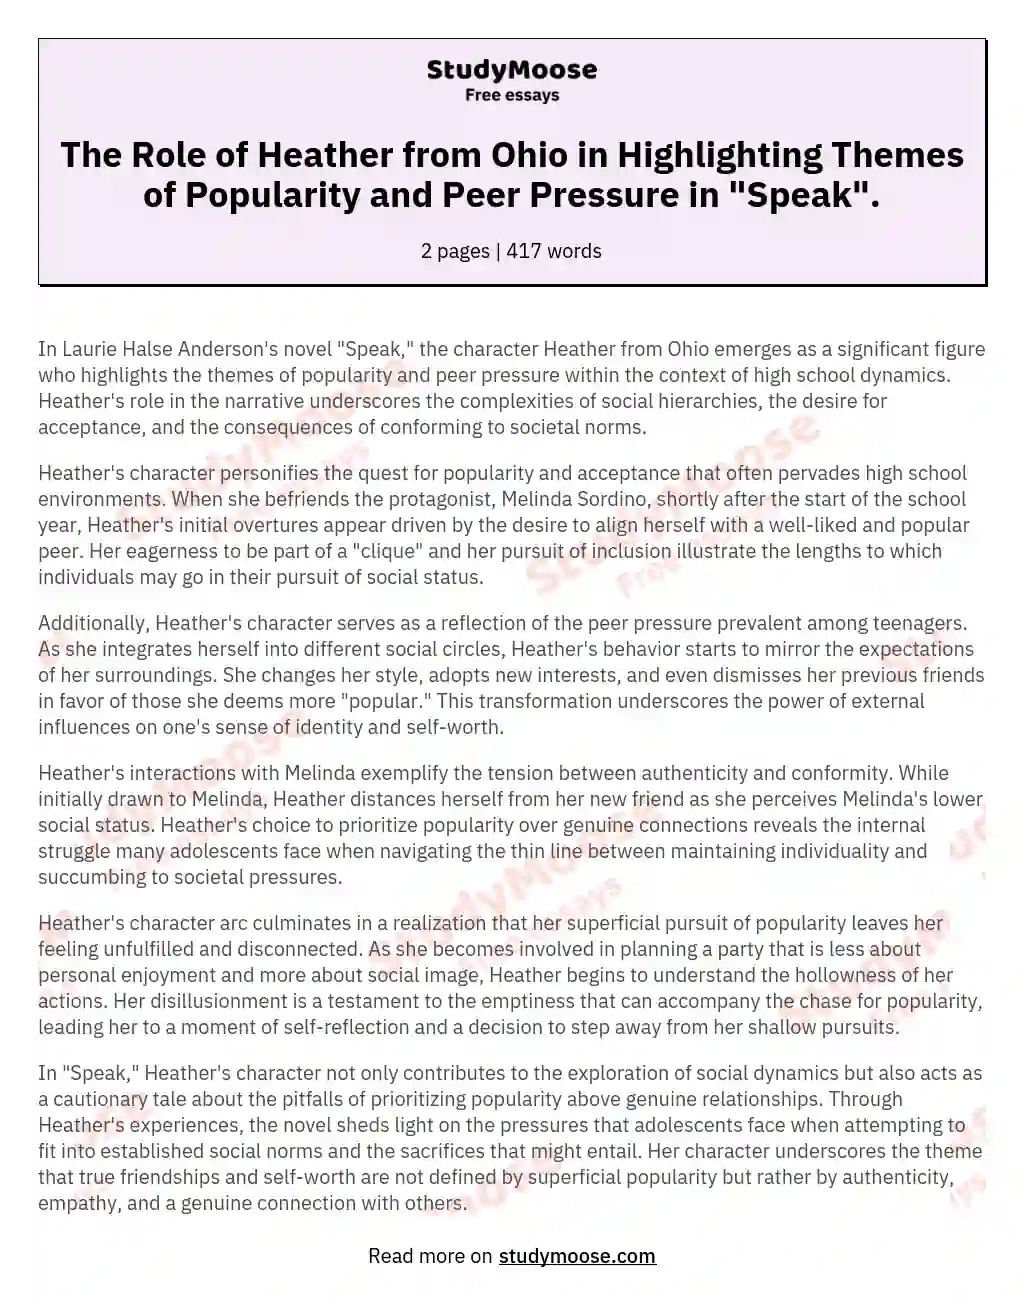 The Role of Heather from Ohio in Highlighting Themes of Popularity and Peer Pressure in "Speak". essay